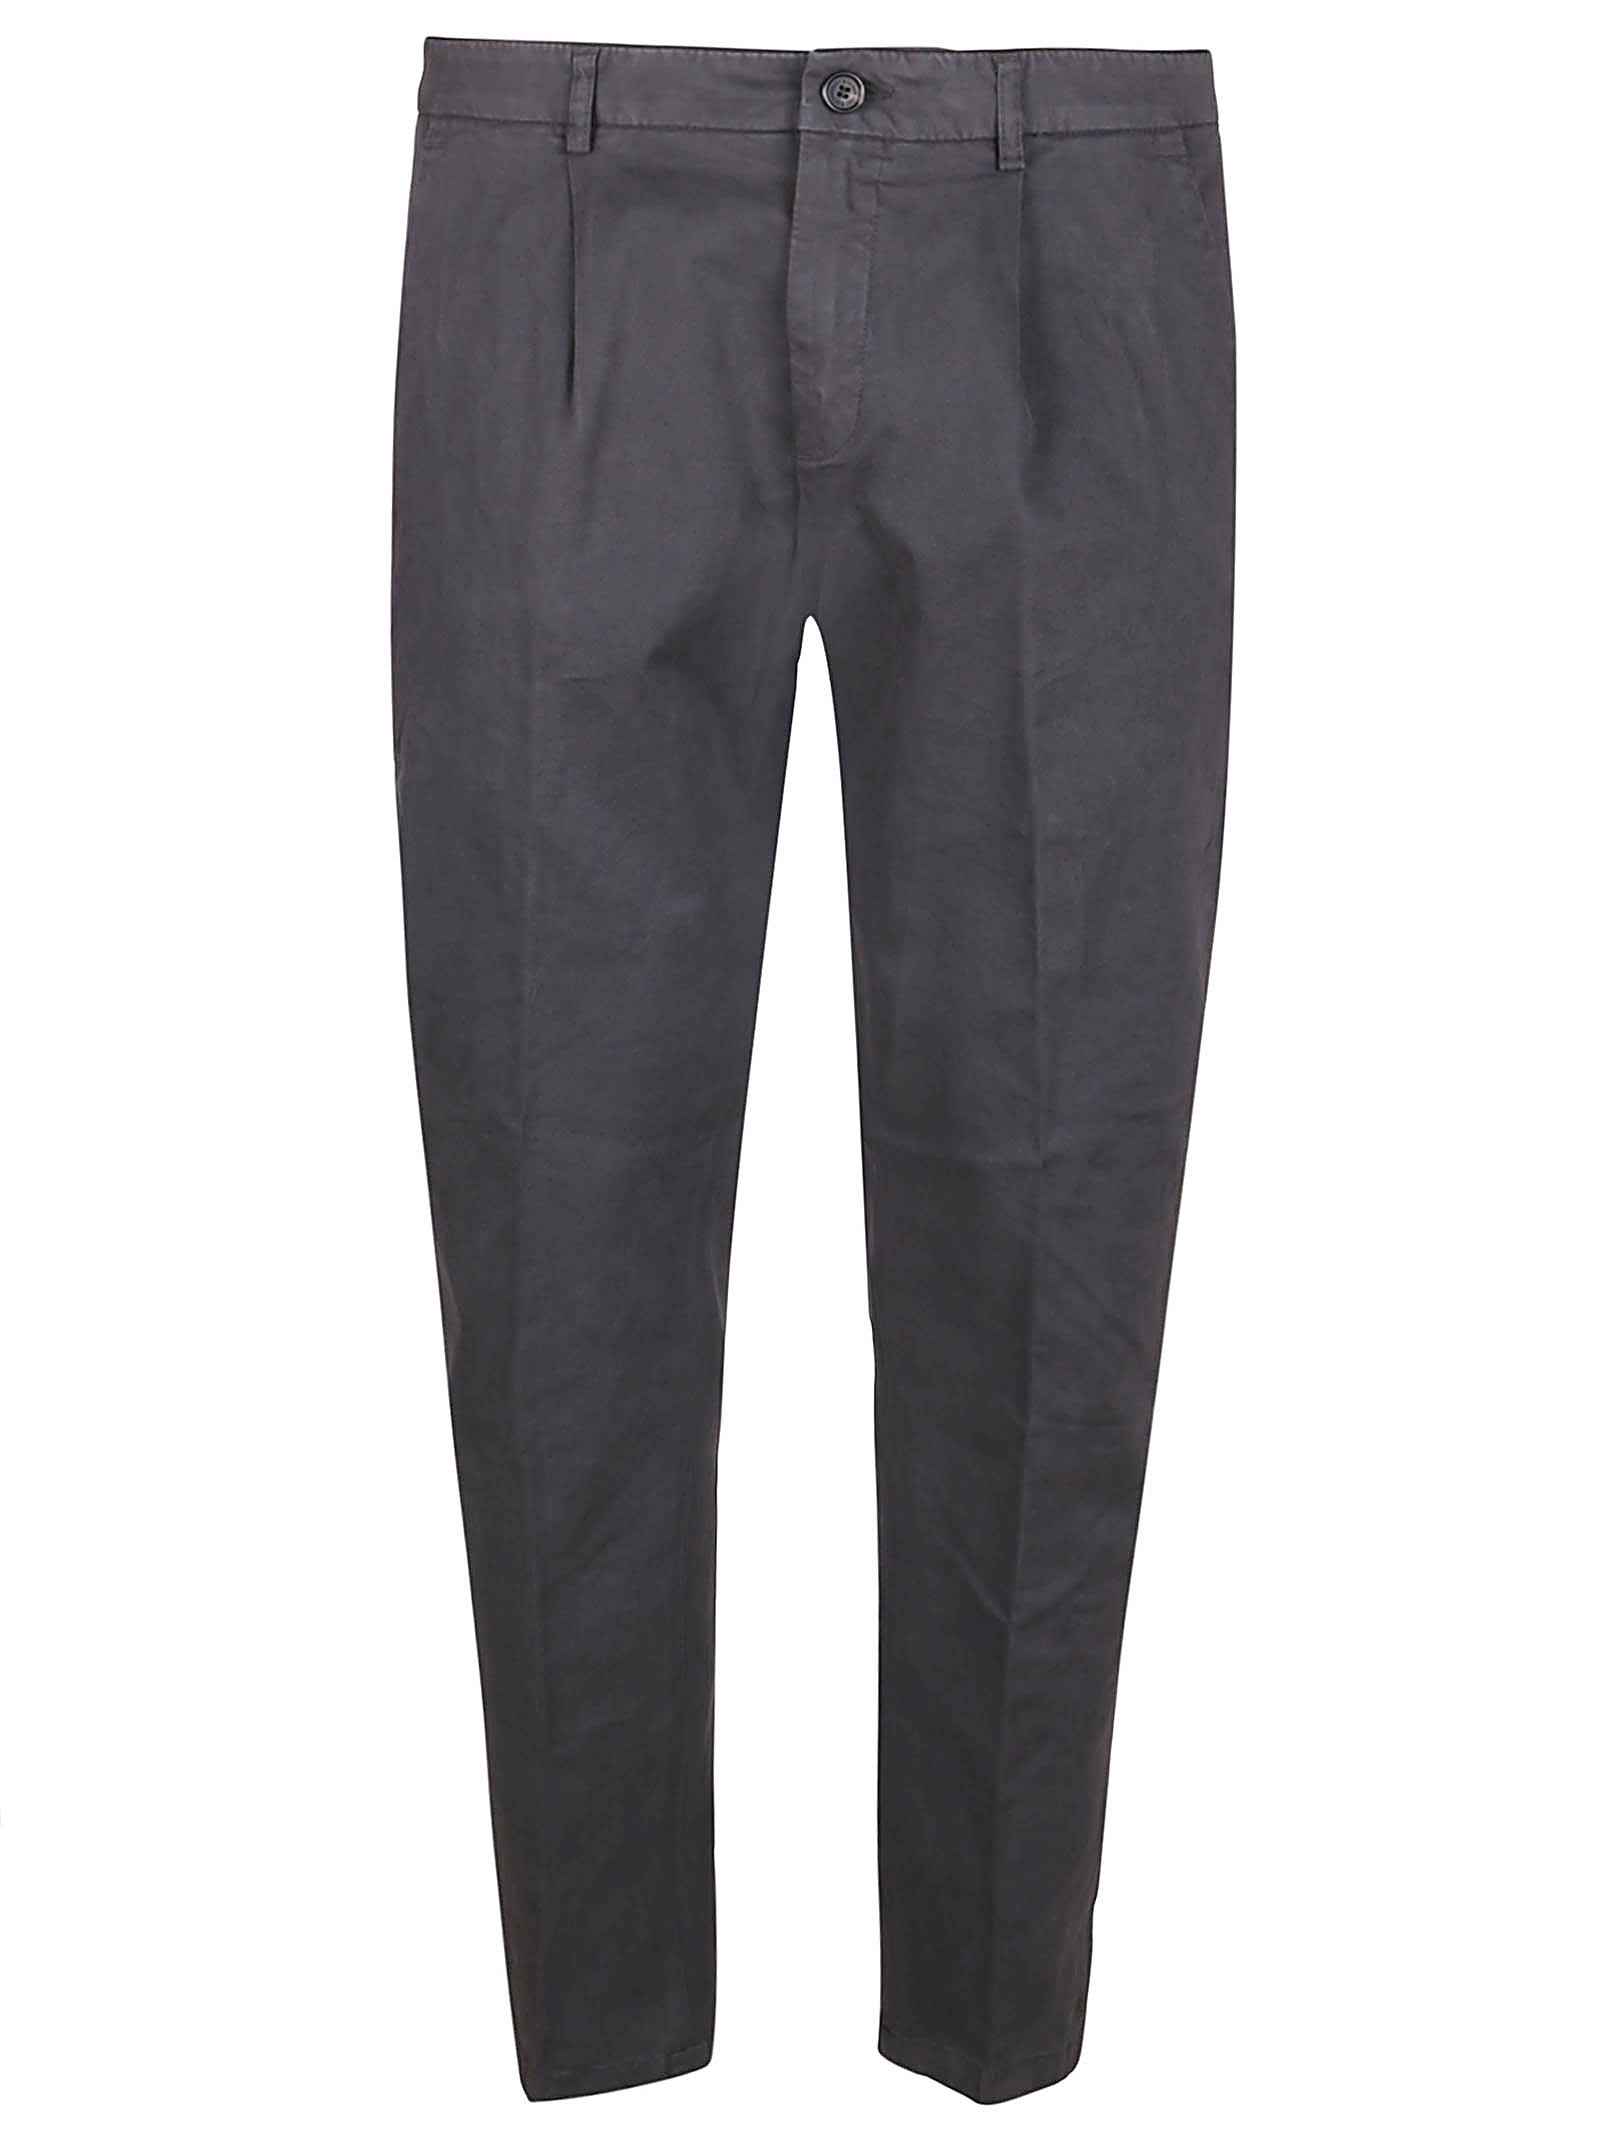 Department Five Pant Prince Pences Chinos